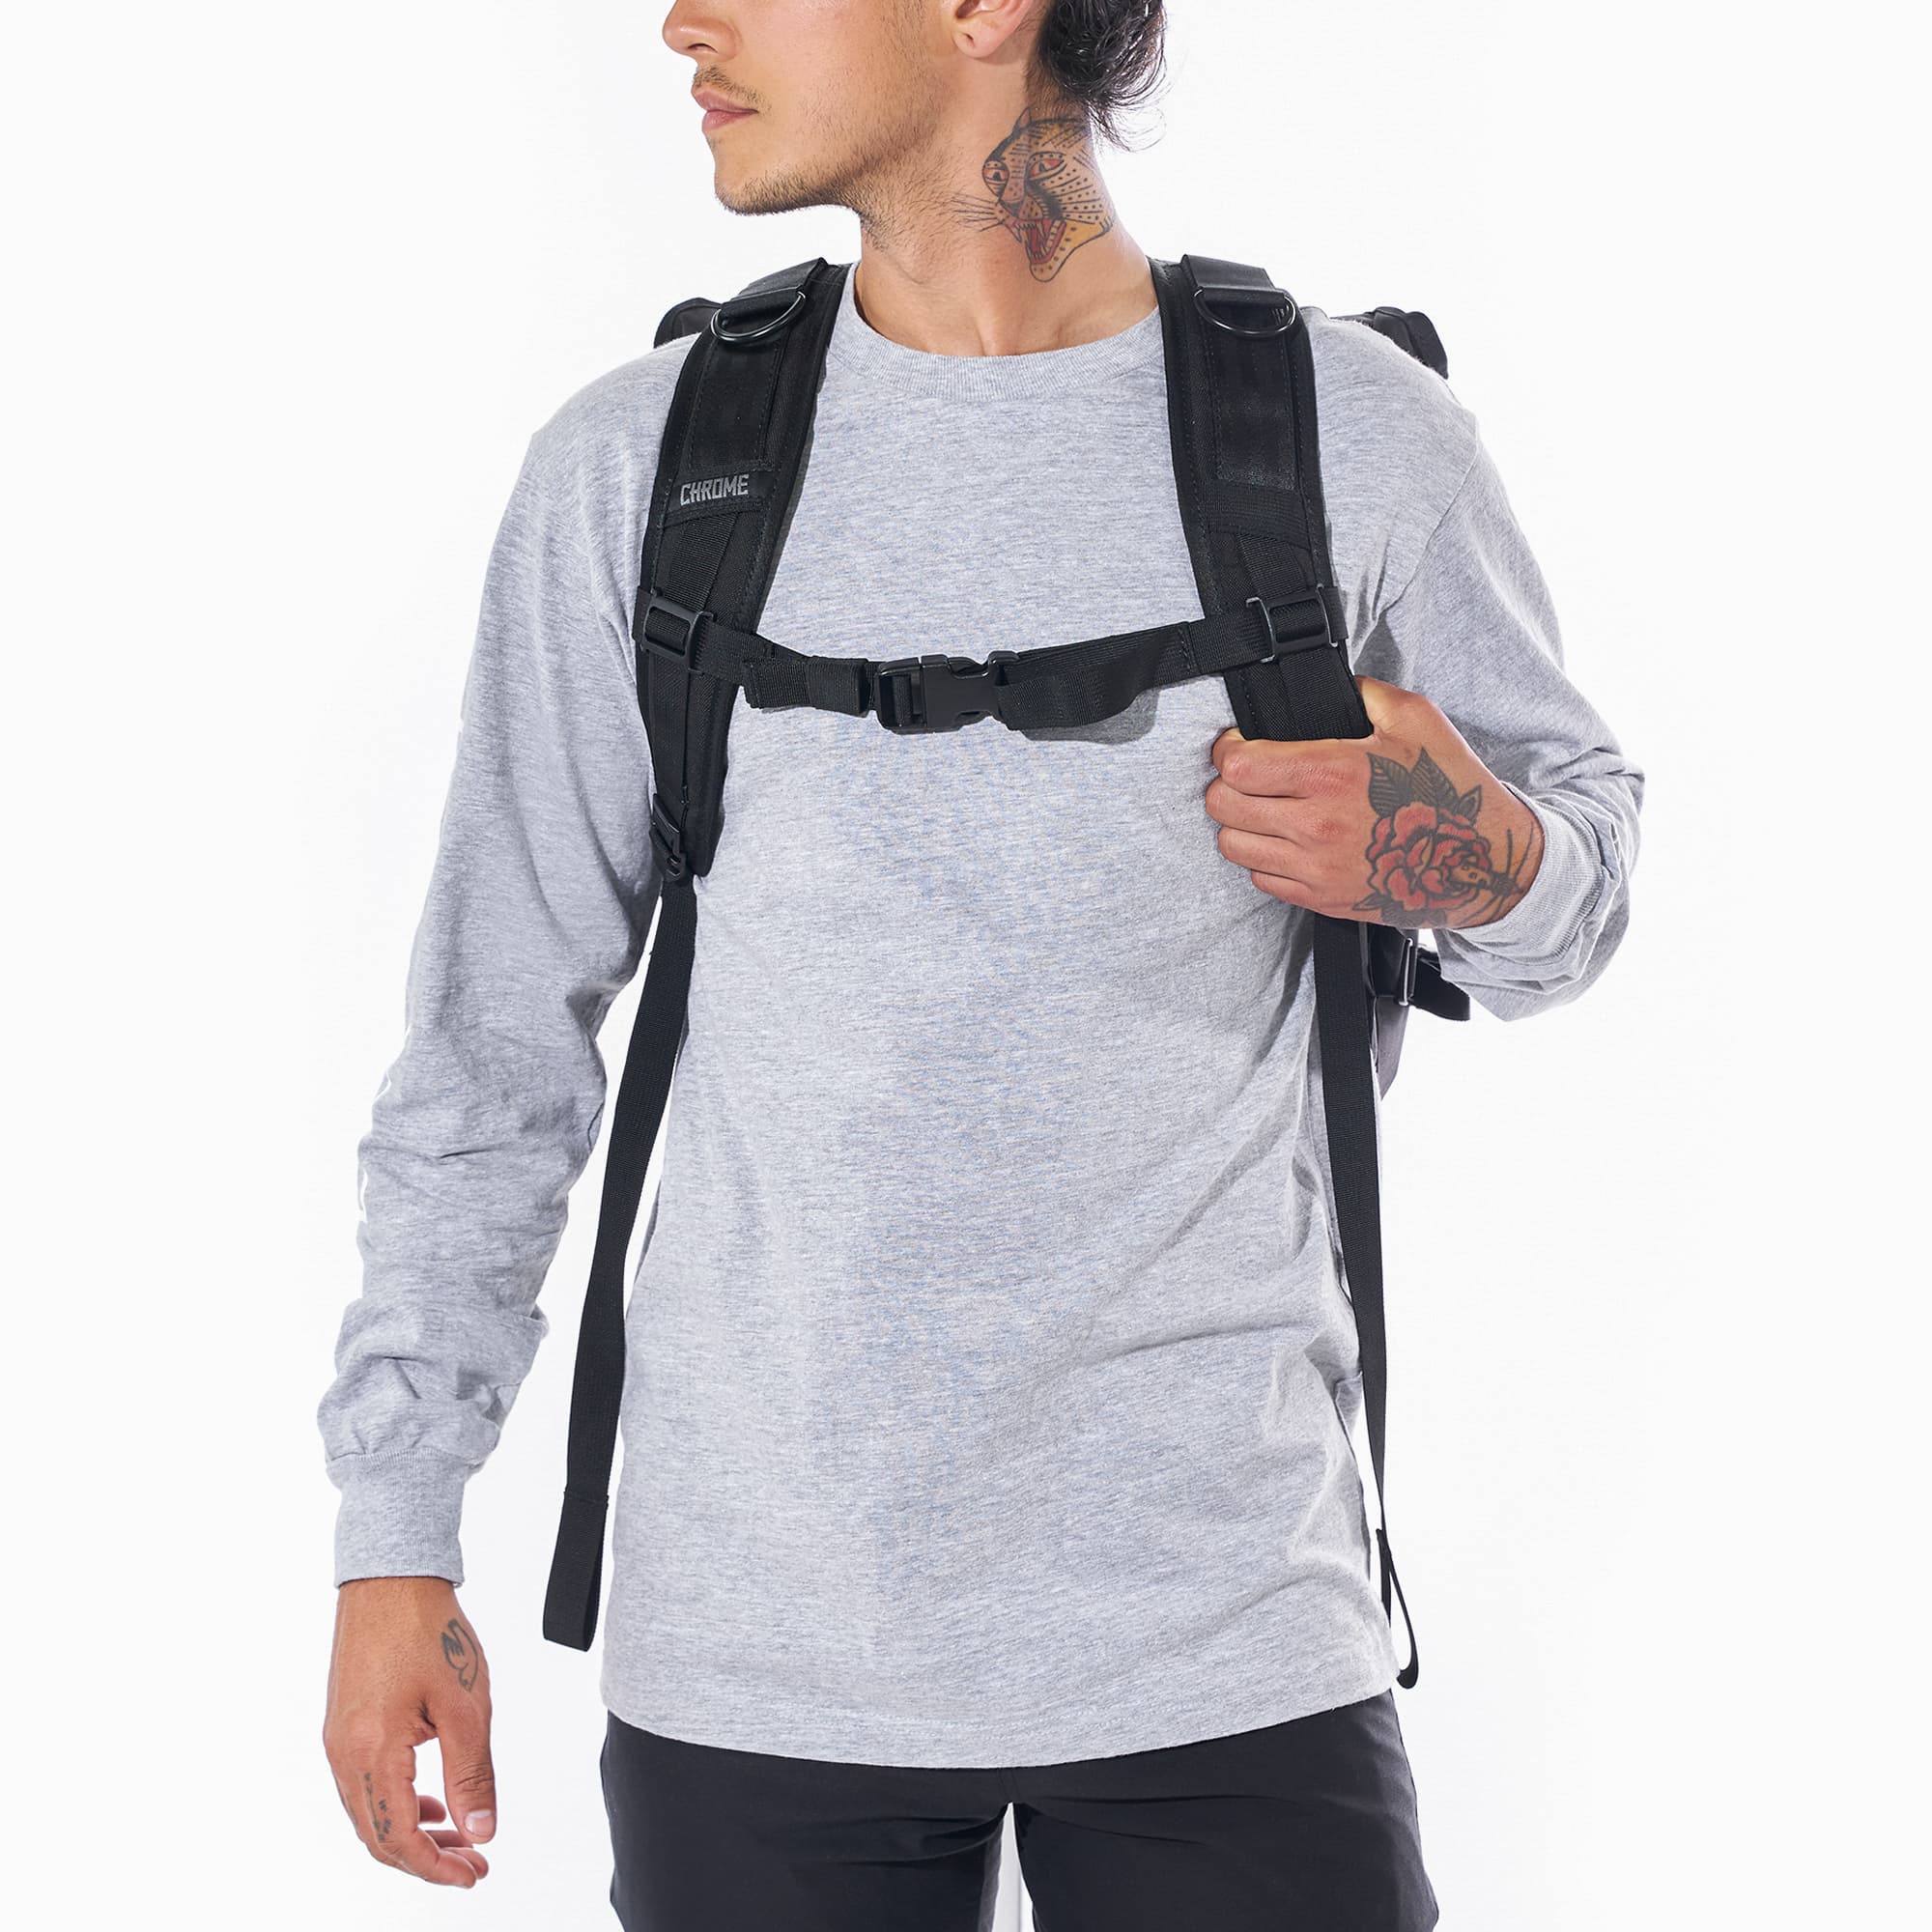 Warsaw medium size flap backpack in black front view as worn by a man